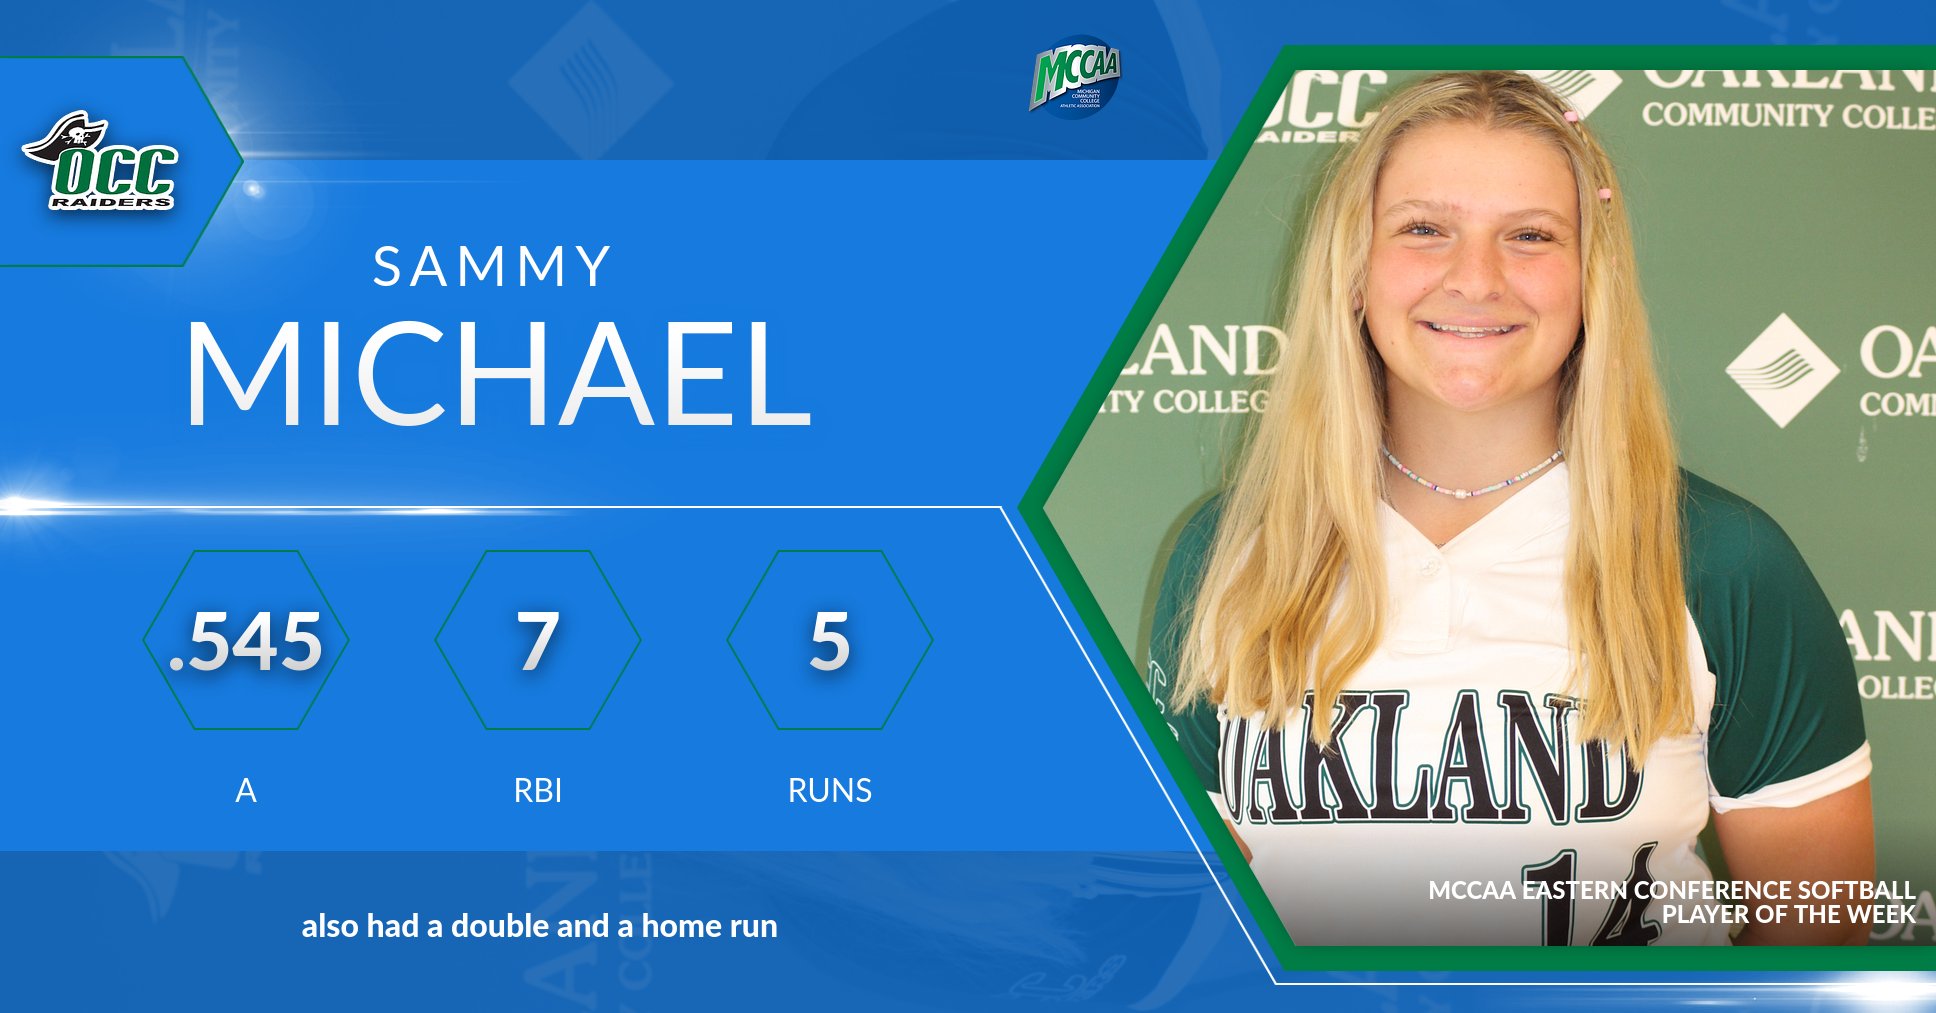 Sammy Michael, MCCAA Eastern Conference Softball Player of the Week, Oakland CC